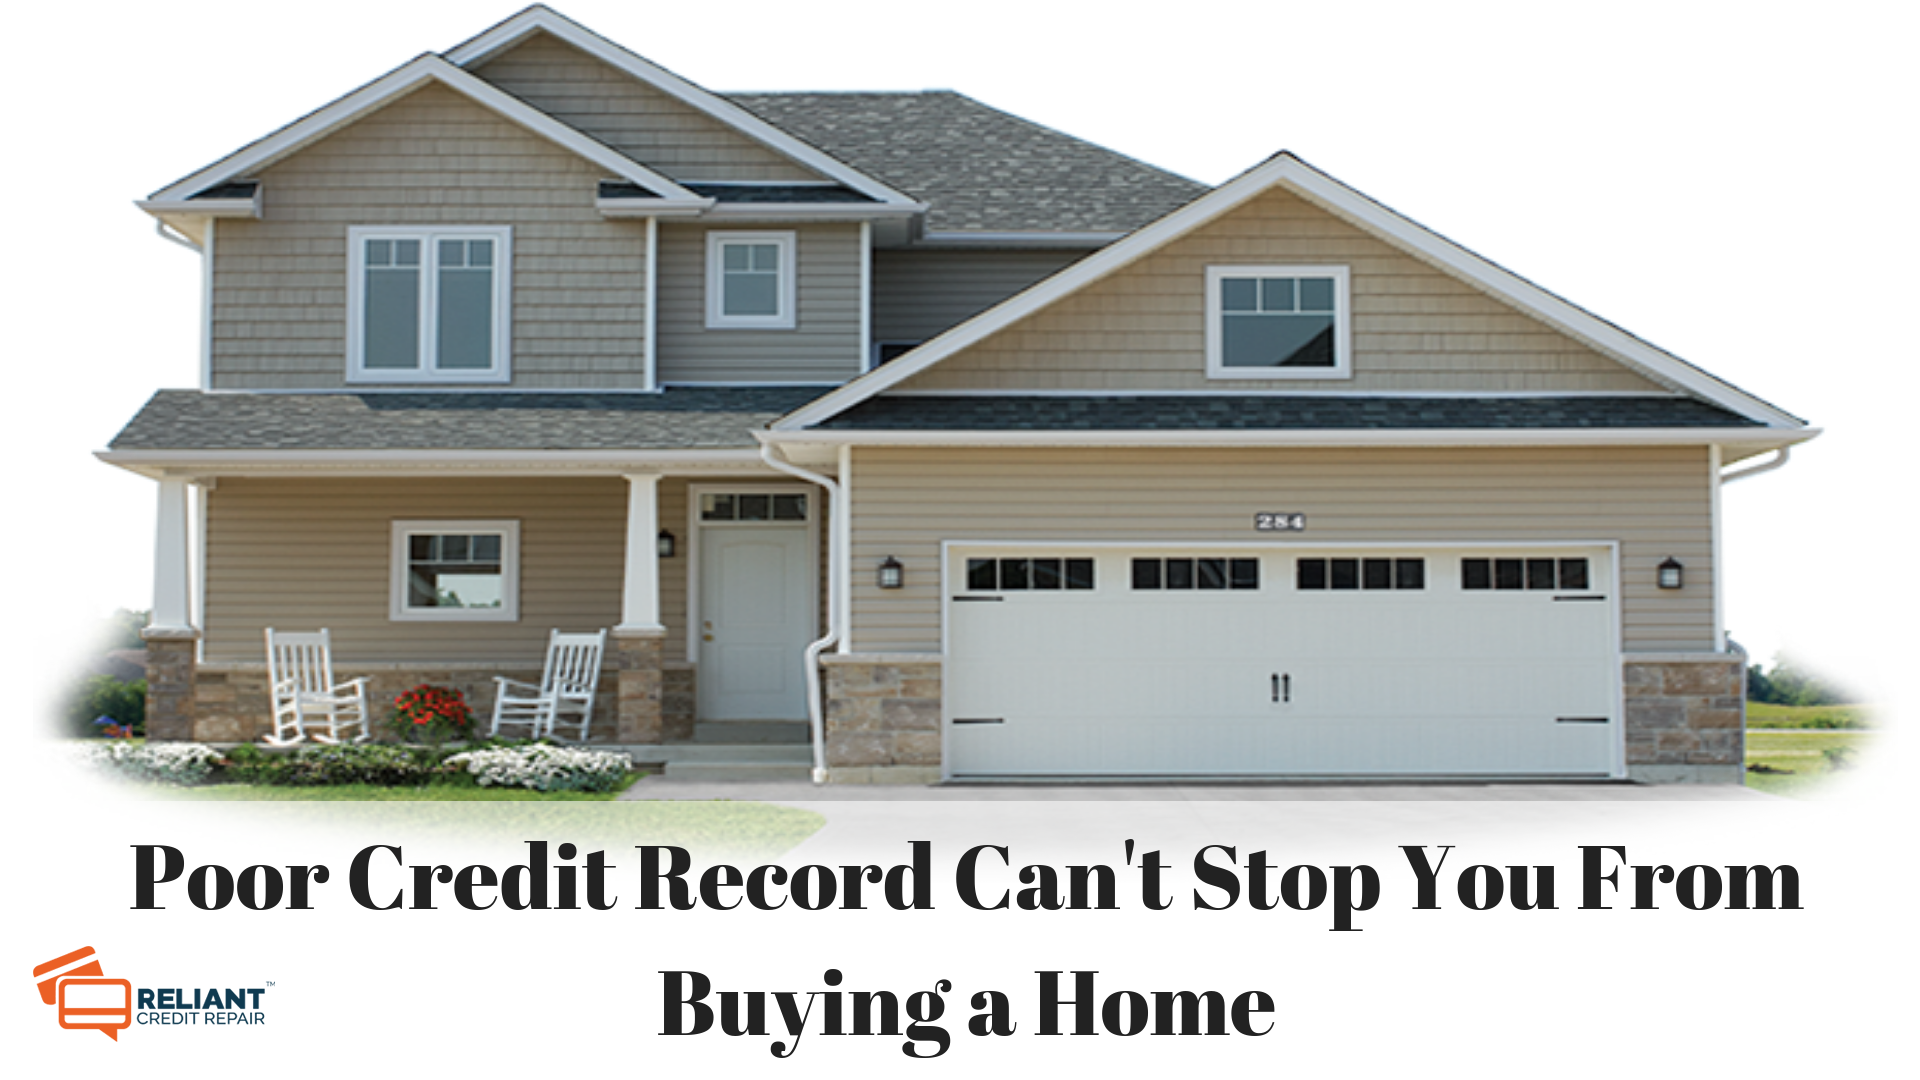 how can i buy a house with poor credit